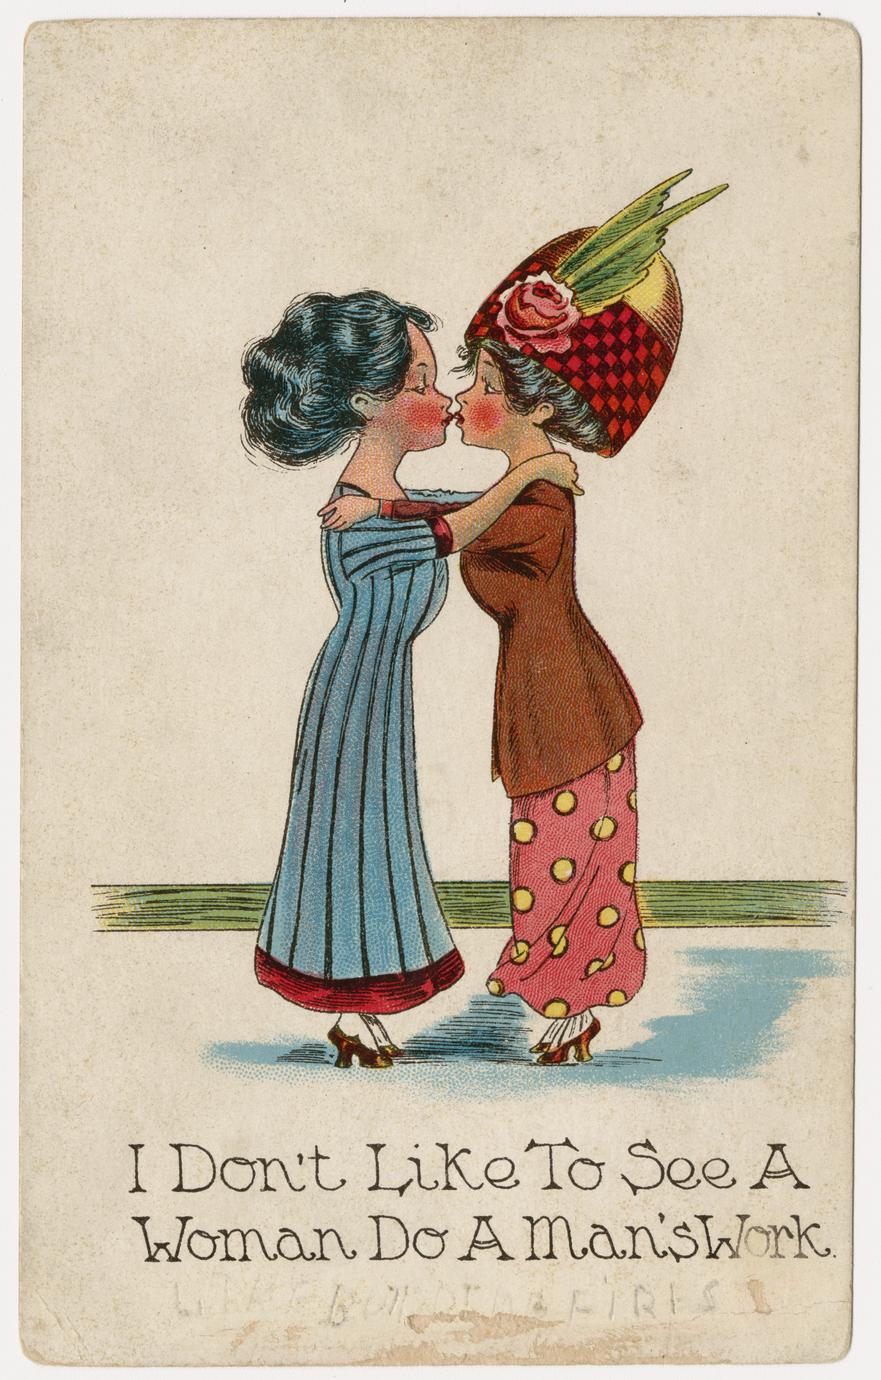 Women kissing, suffrage postcard (1 of 2)